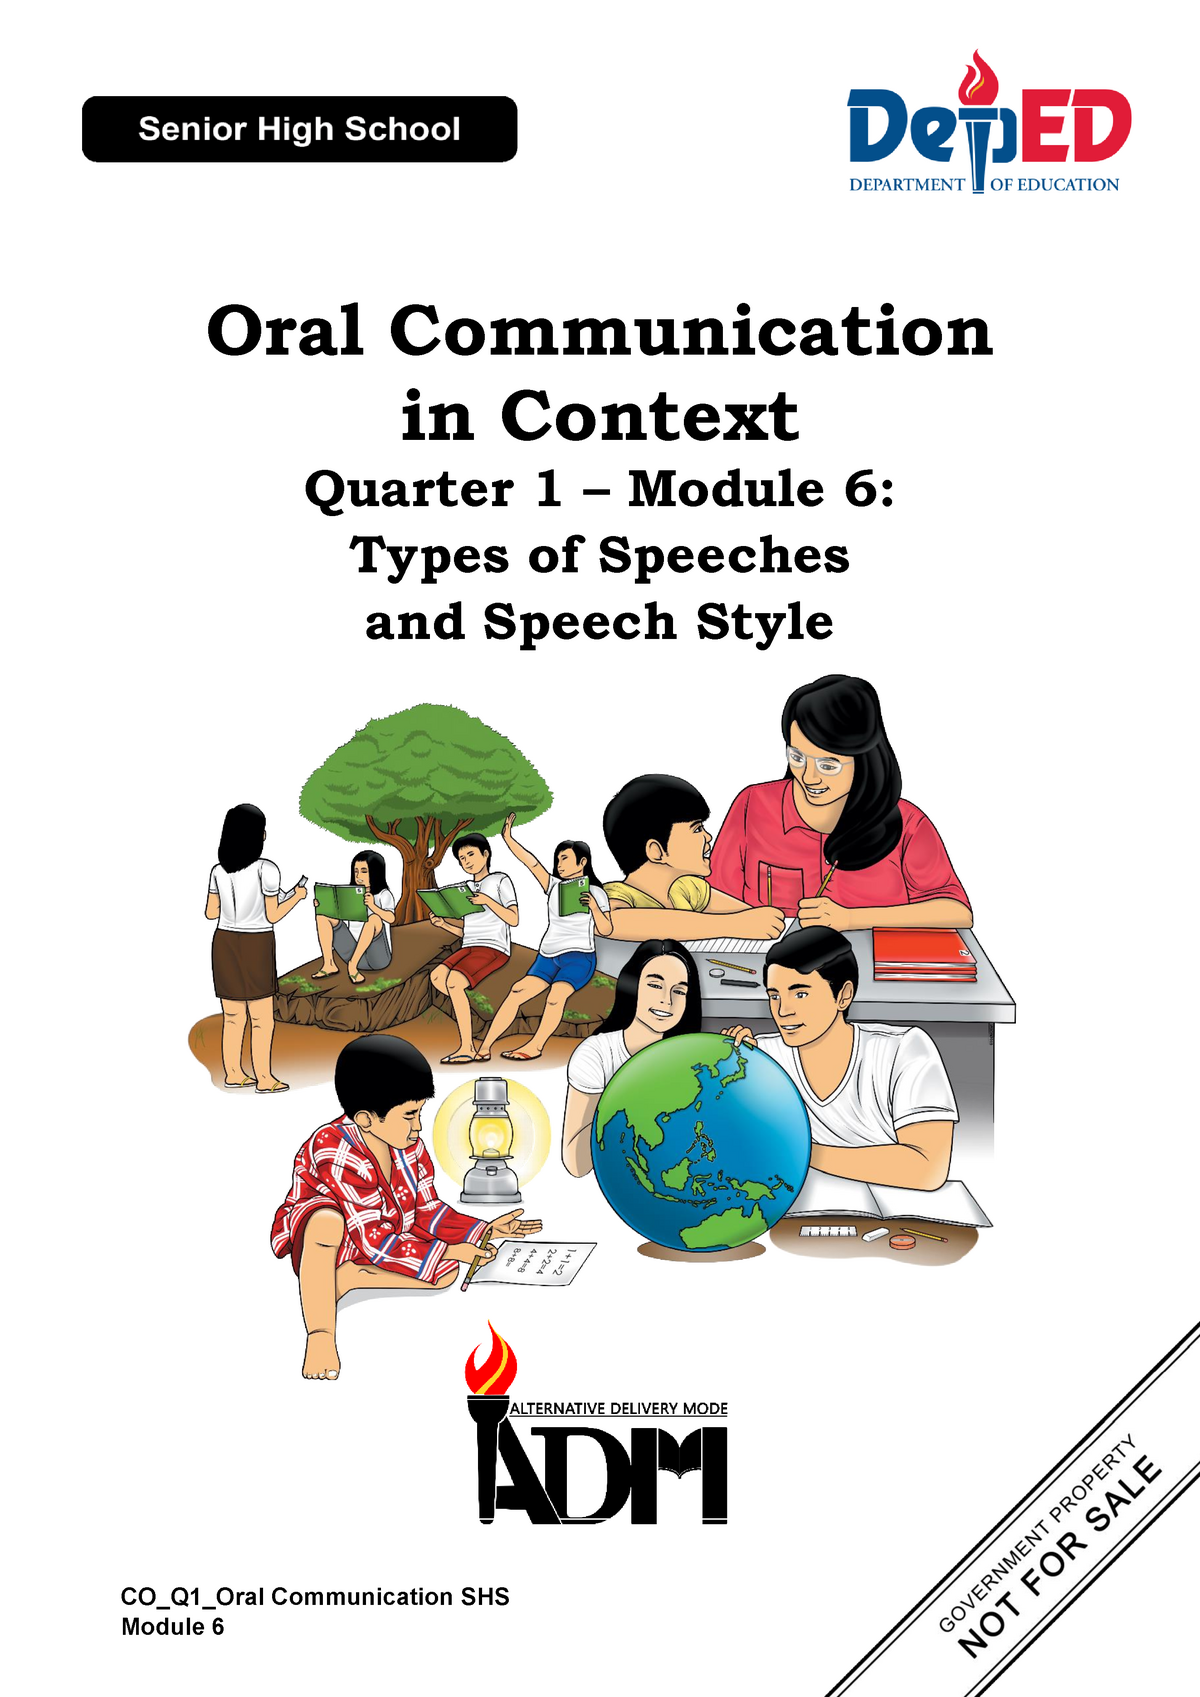 types of speeches in oral communication